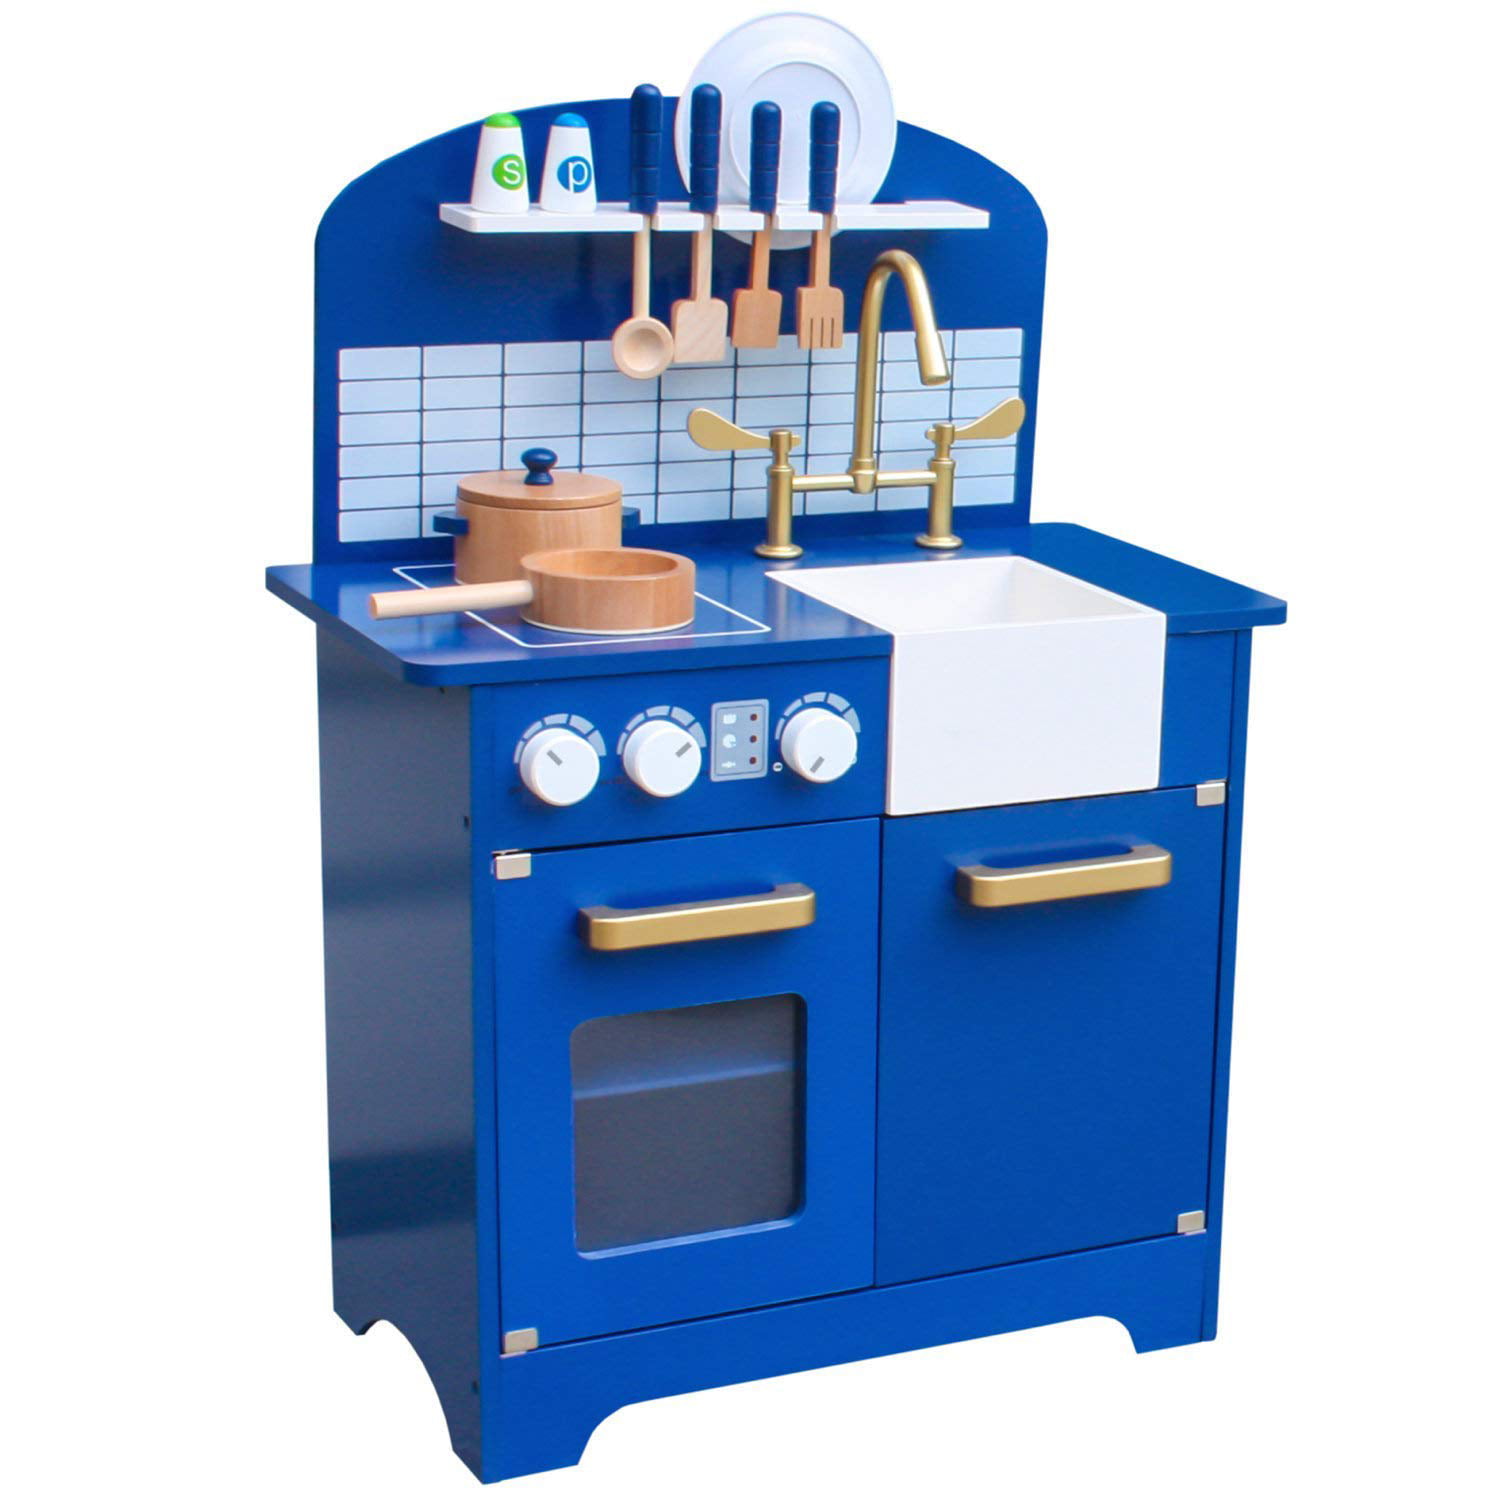 Pidoko Kids Play Kitchen, Navy Blue Toy Kitchen Set with Accessories, Limited Edition - Perfect